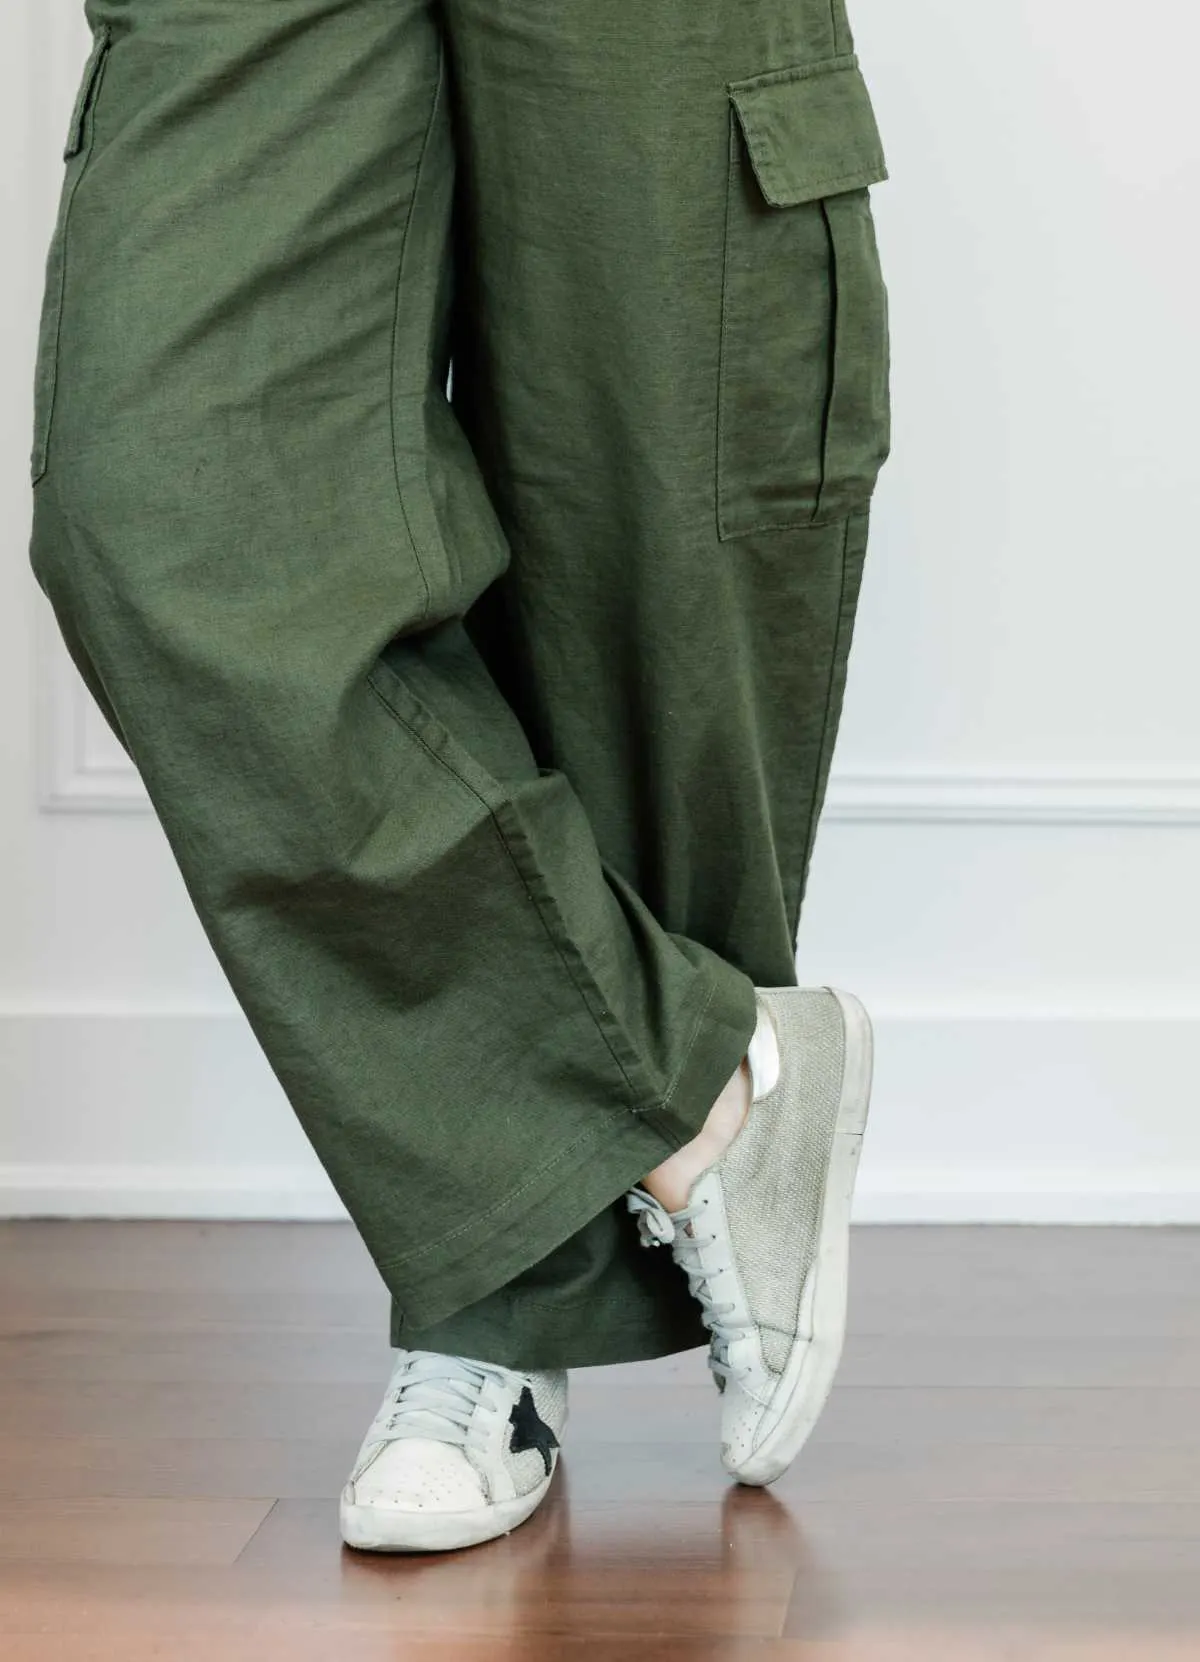 Cropped view of woman's legs wearing sleek off white star sneakers with full length wide olive green linen pants.